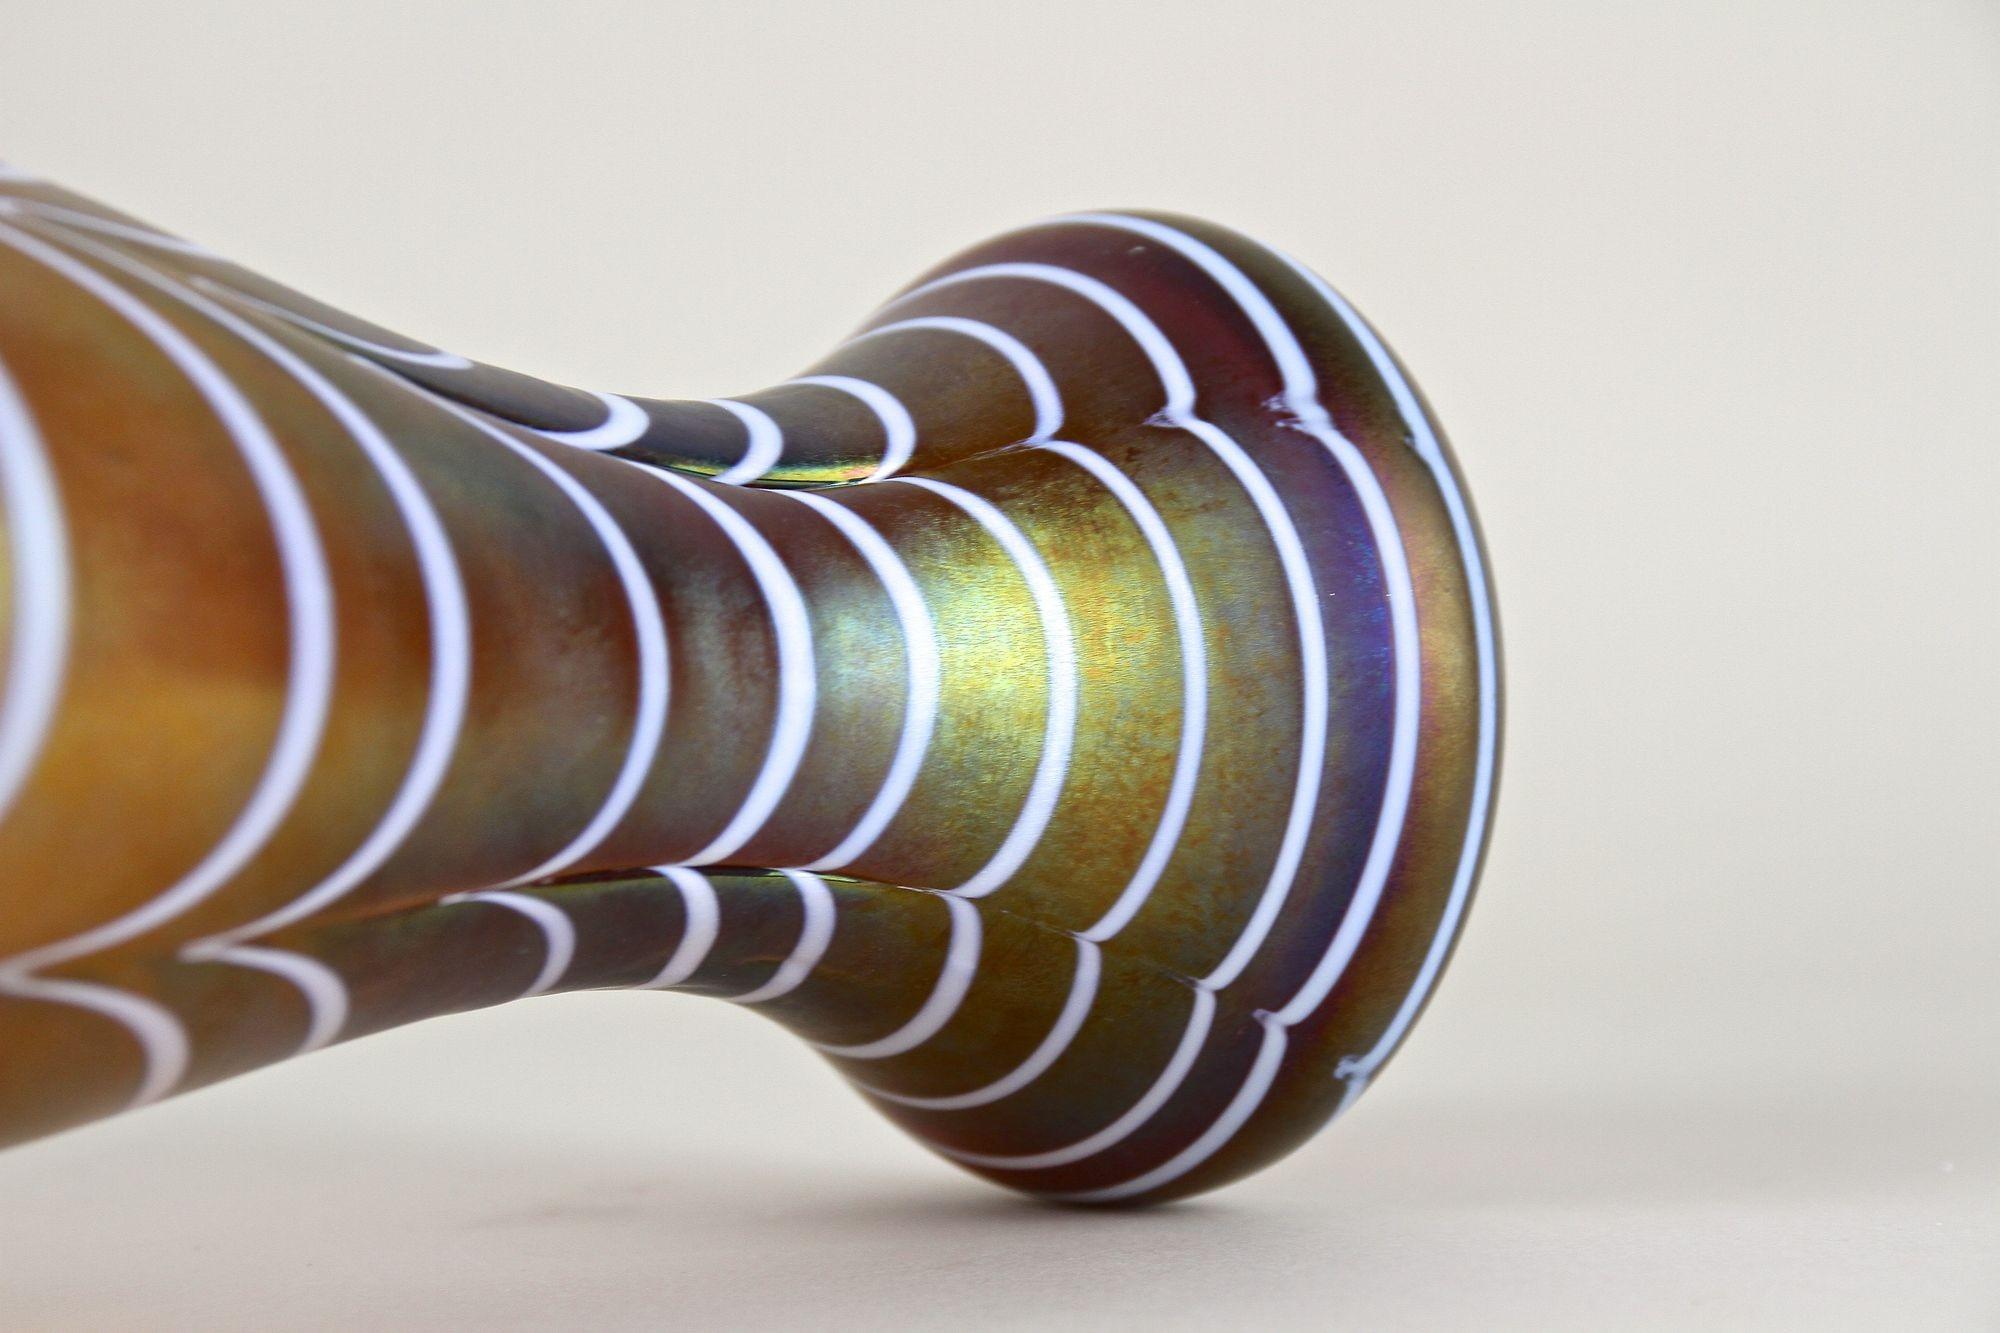 Art Nouveau Iridescent Glass Vase Attributed To Loetz Witwe, Bohemia, ca. 1915 For Sale 8